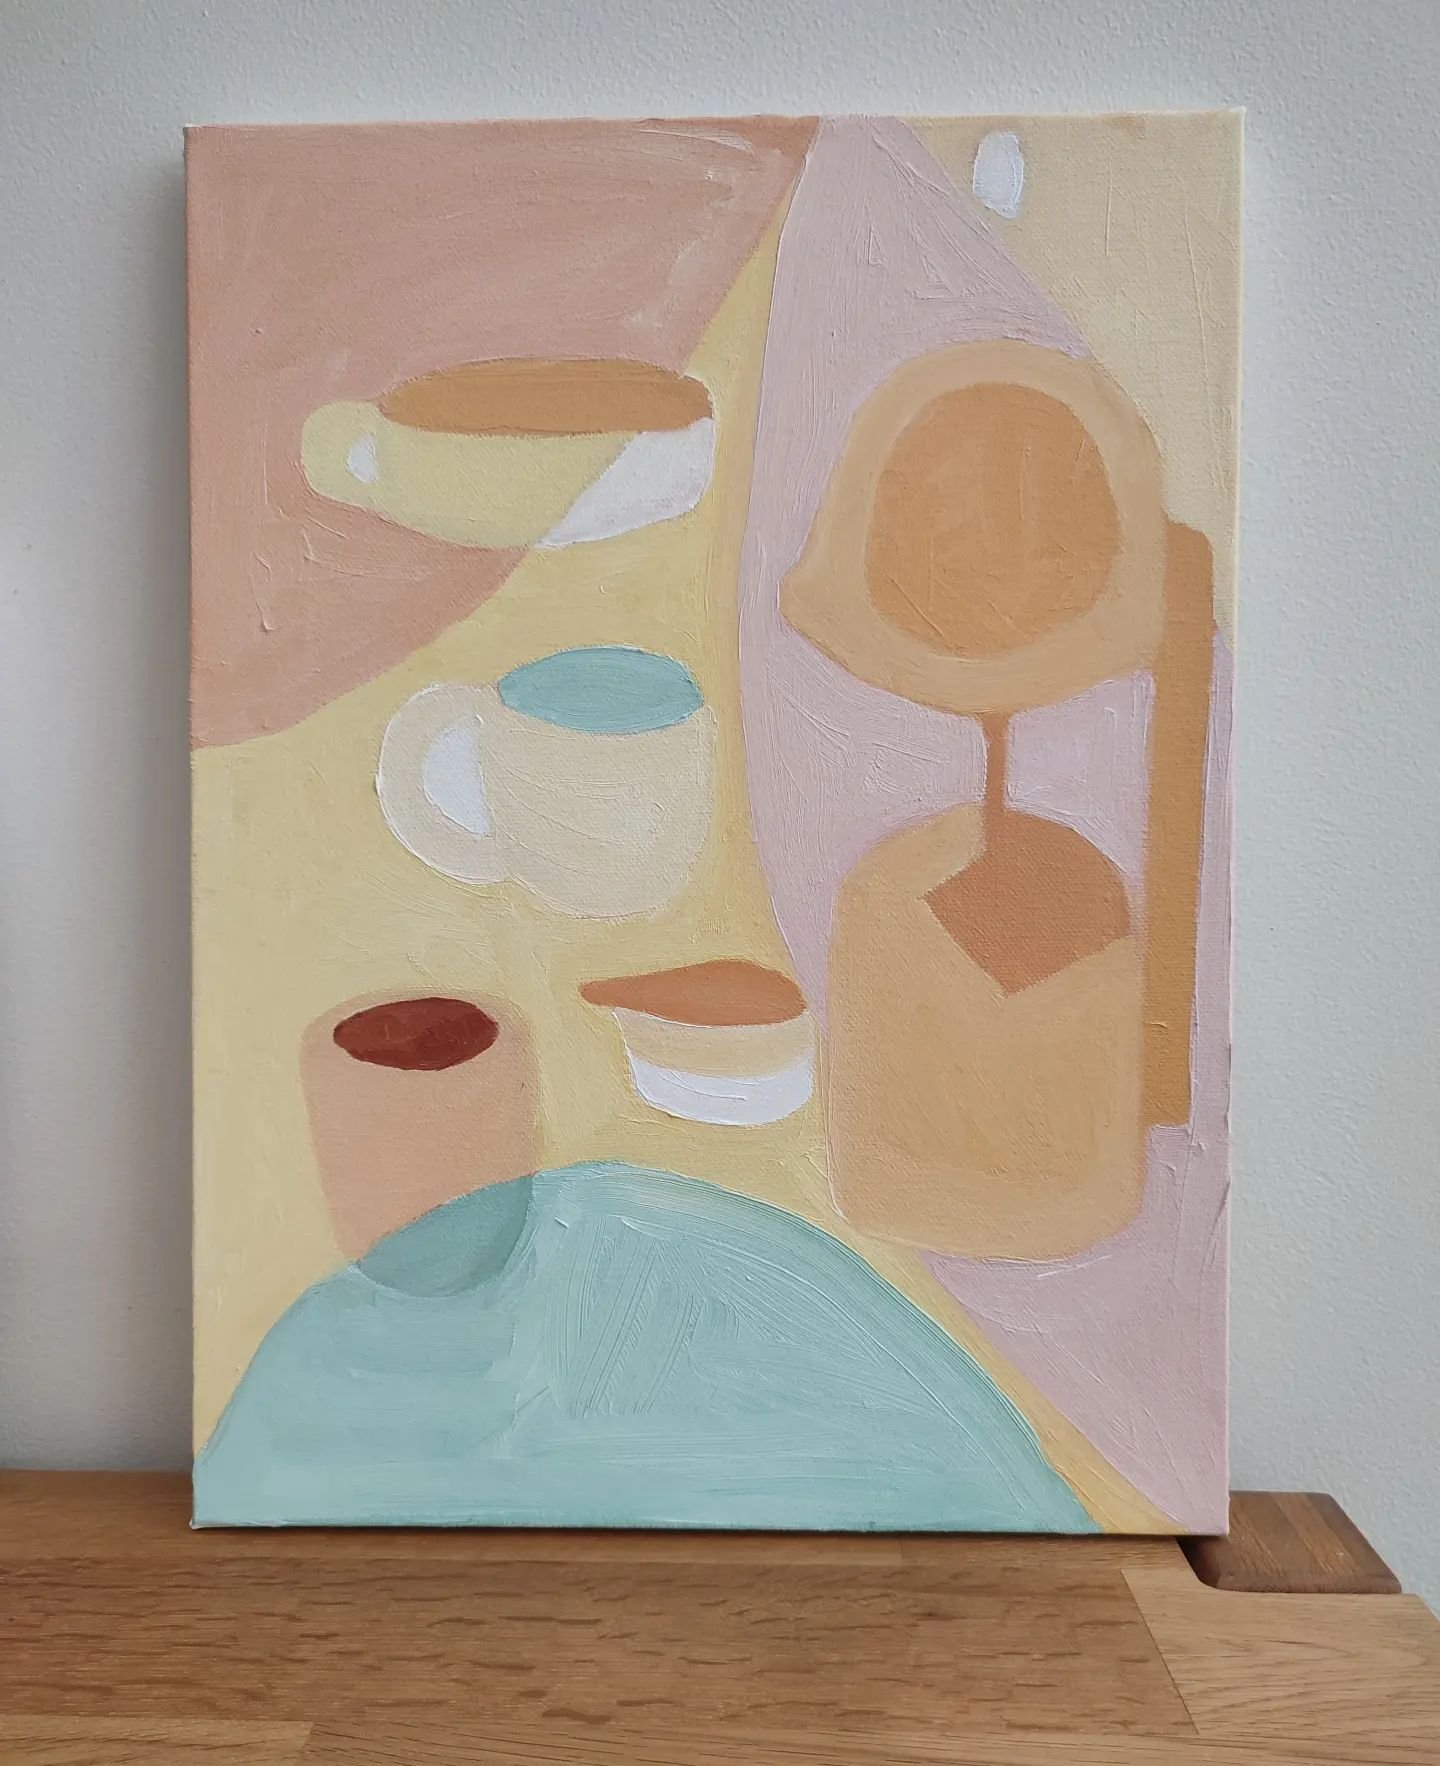 This piece i'm working on at the moment......just trying to work out whether it's done. Any views? 

A3 oil on canvas

#oilpainting #paintingofcafetiereandcups #claireburrissart #pastelcolours